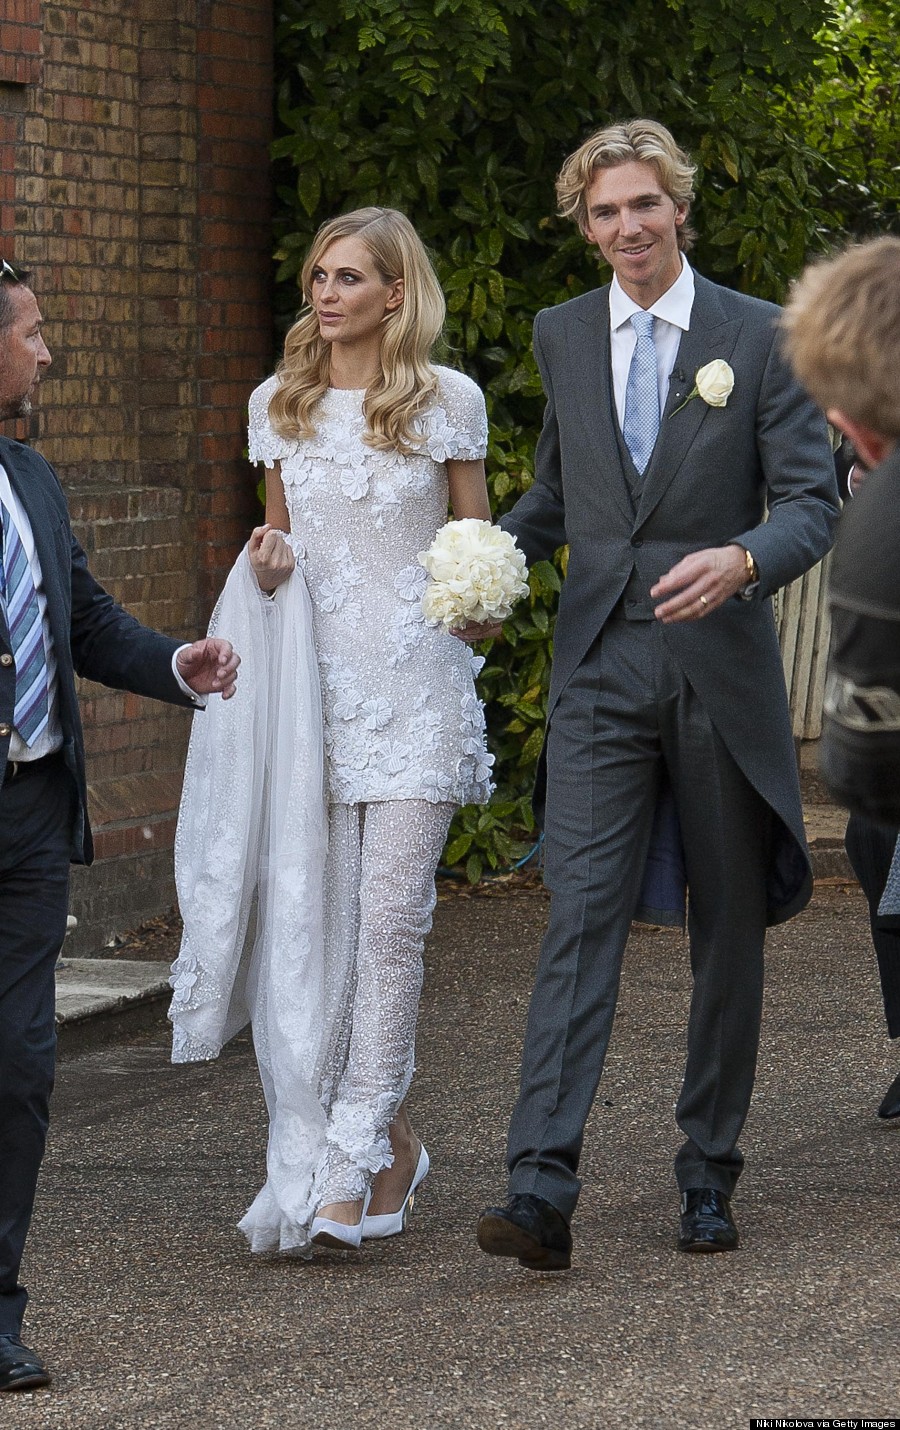 Poppy Delevingne Wore The Most Amazing Second Wedding Dress | HuffPost ...